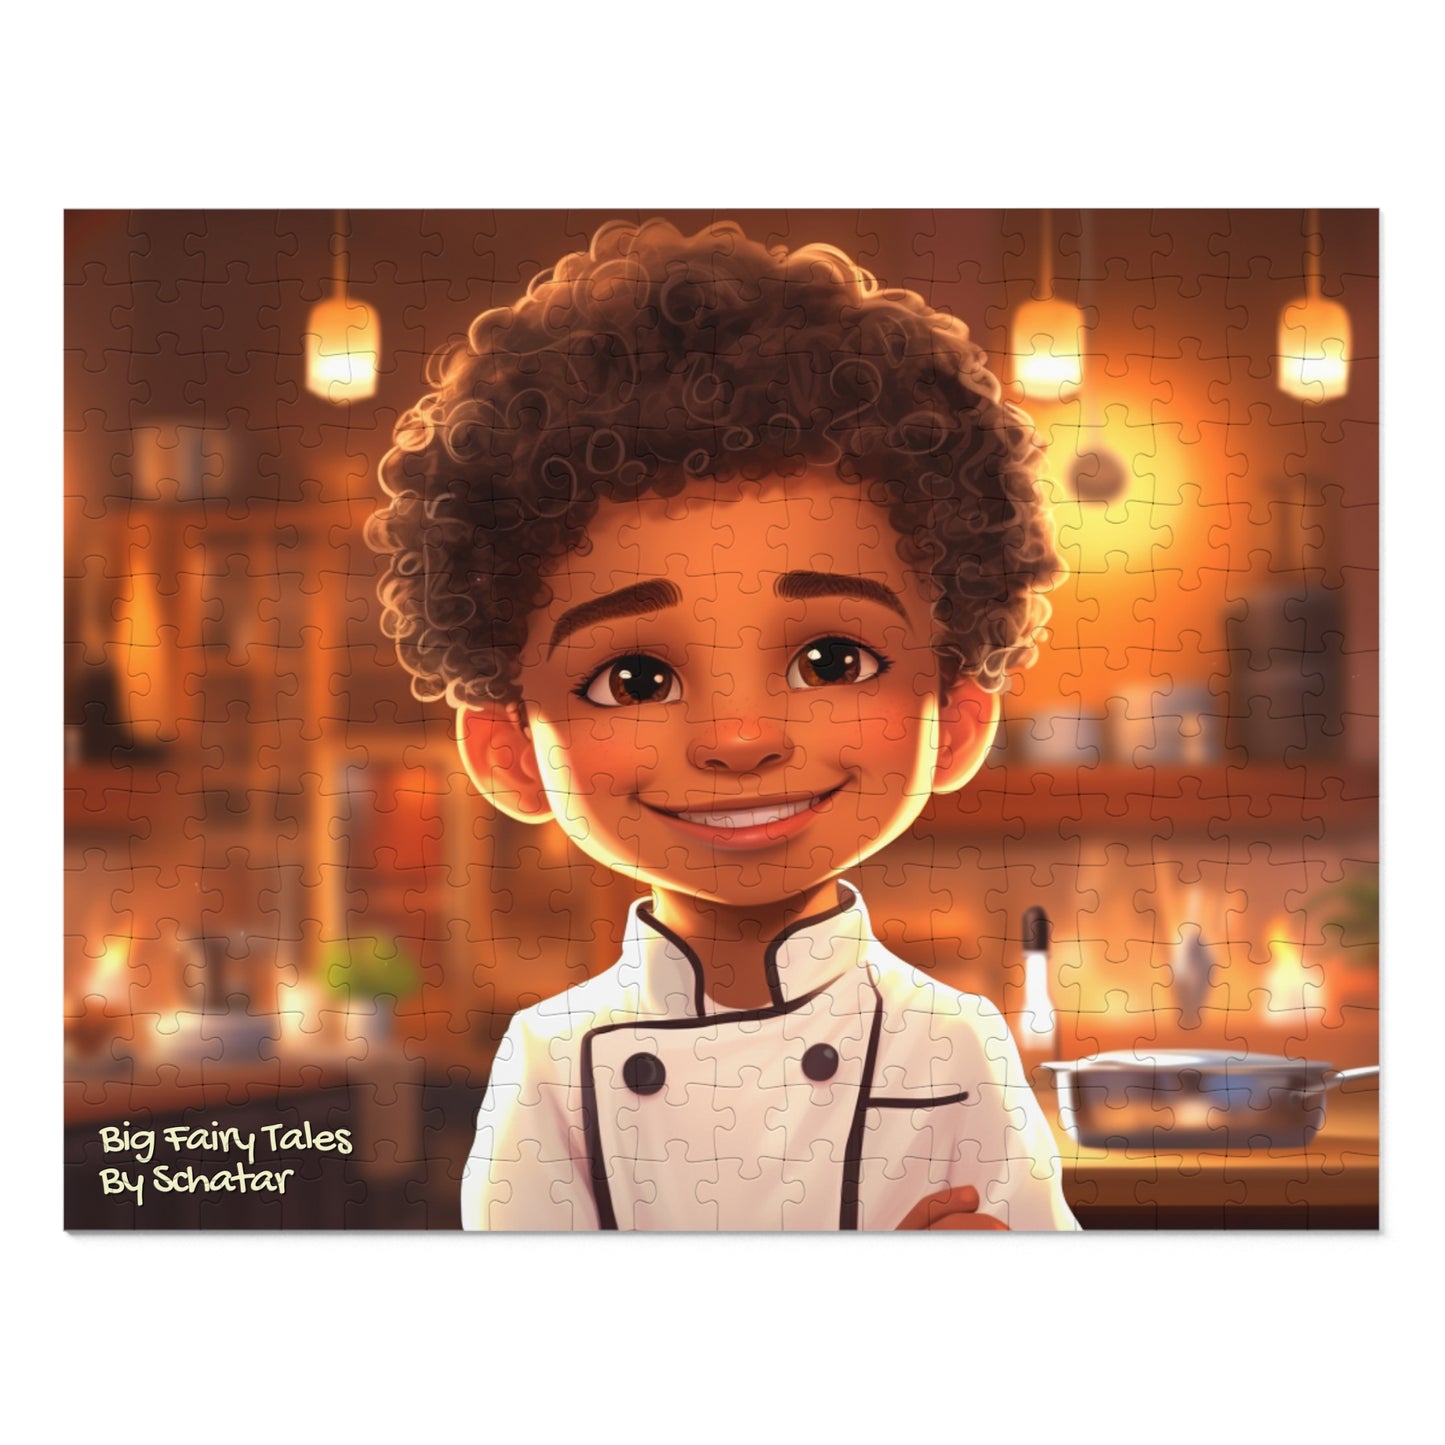 Restauranteur - Big Little Professionals Puzzle 20 From Big Fairy Tales By Schatar